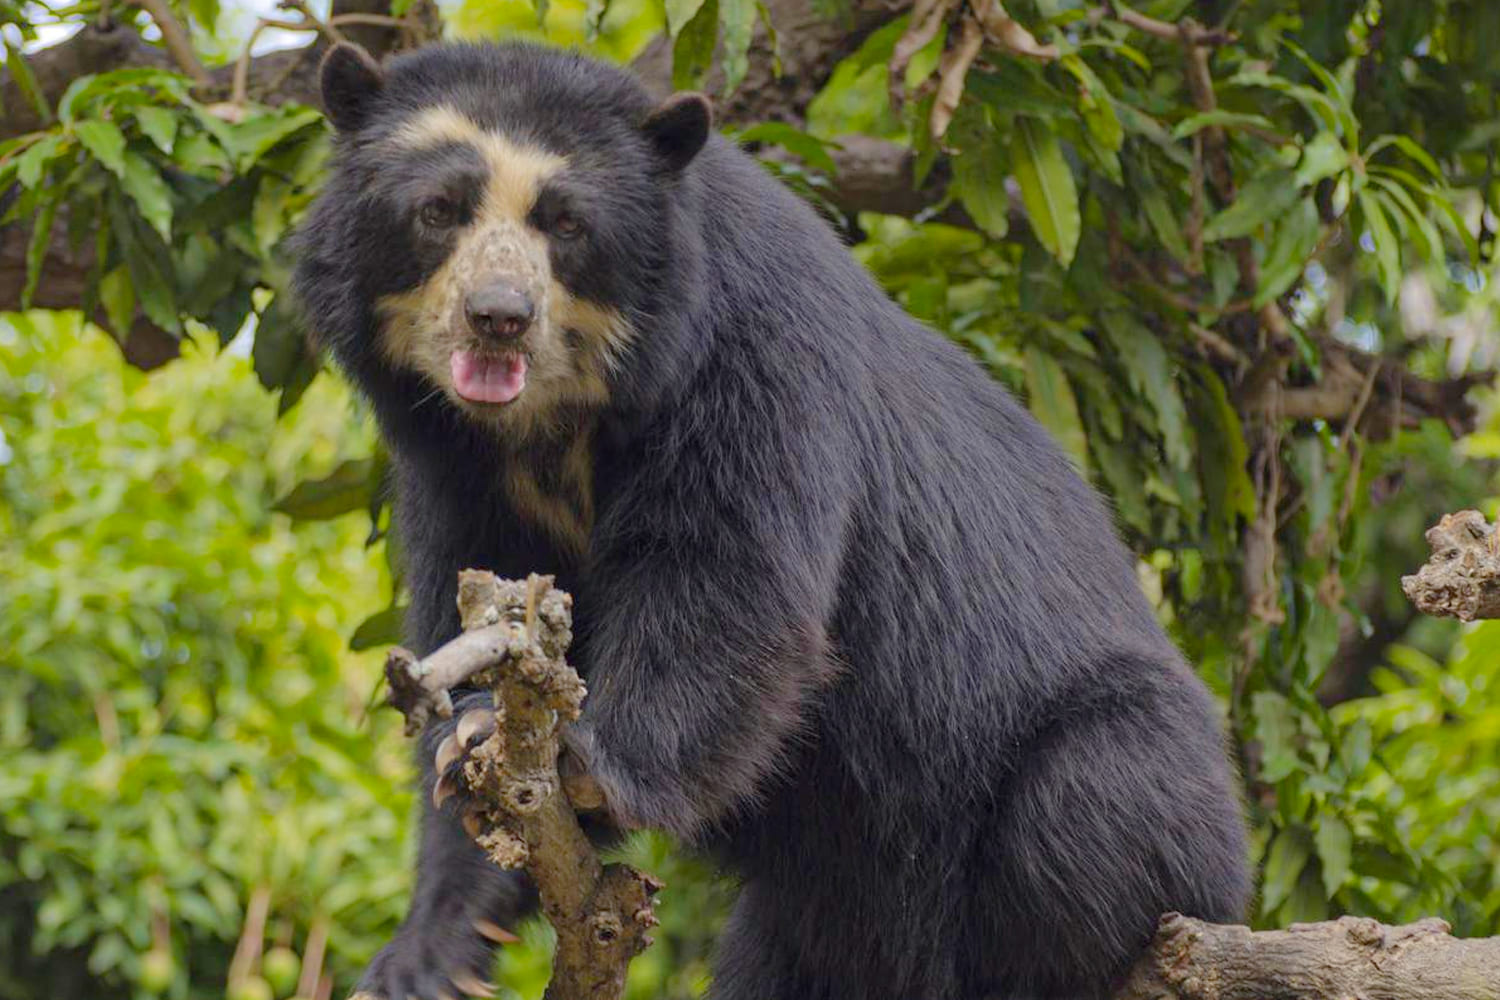 THE SPECTACLED BEAR OF SOUTH AMERICA